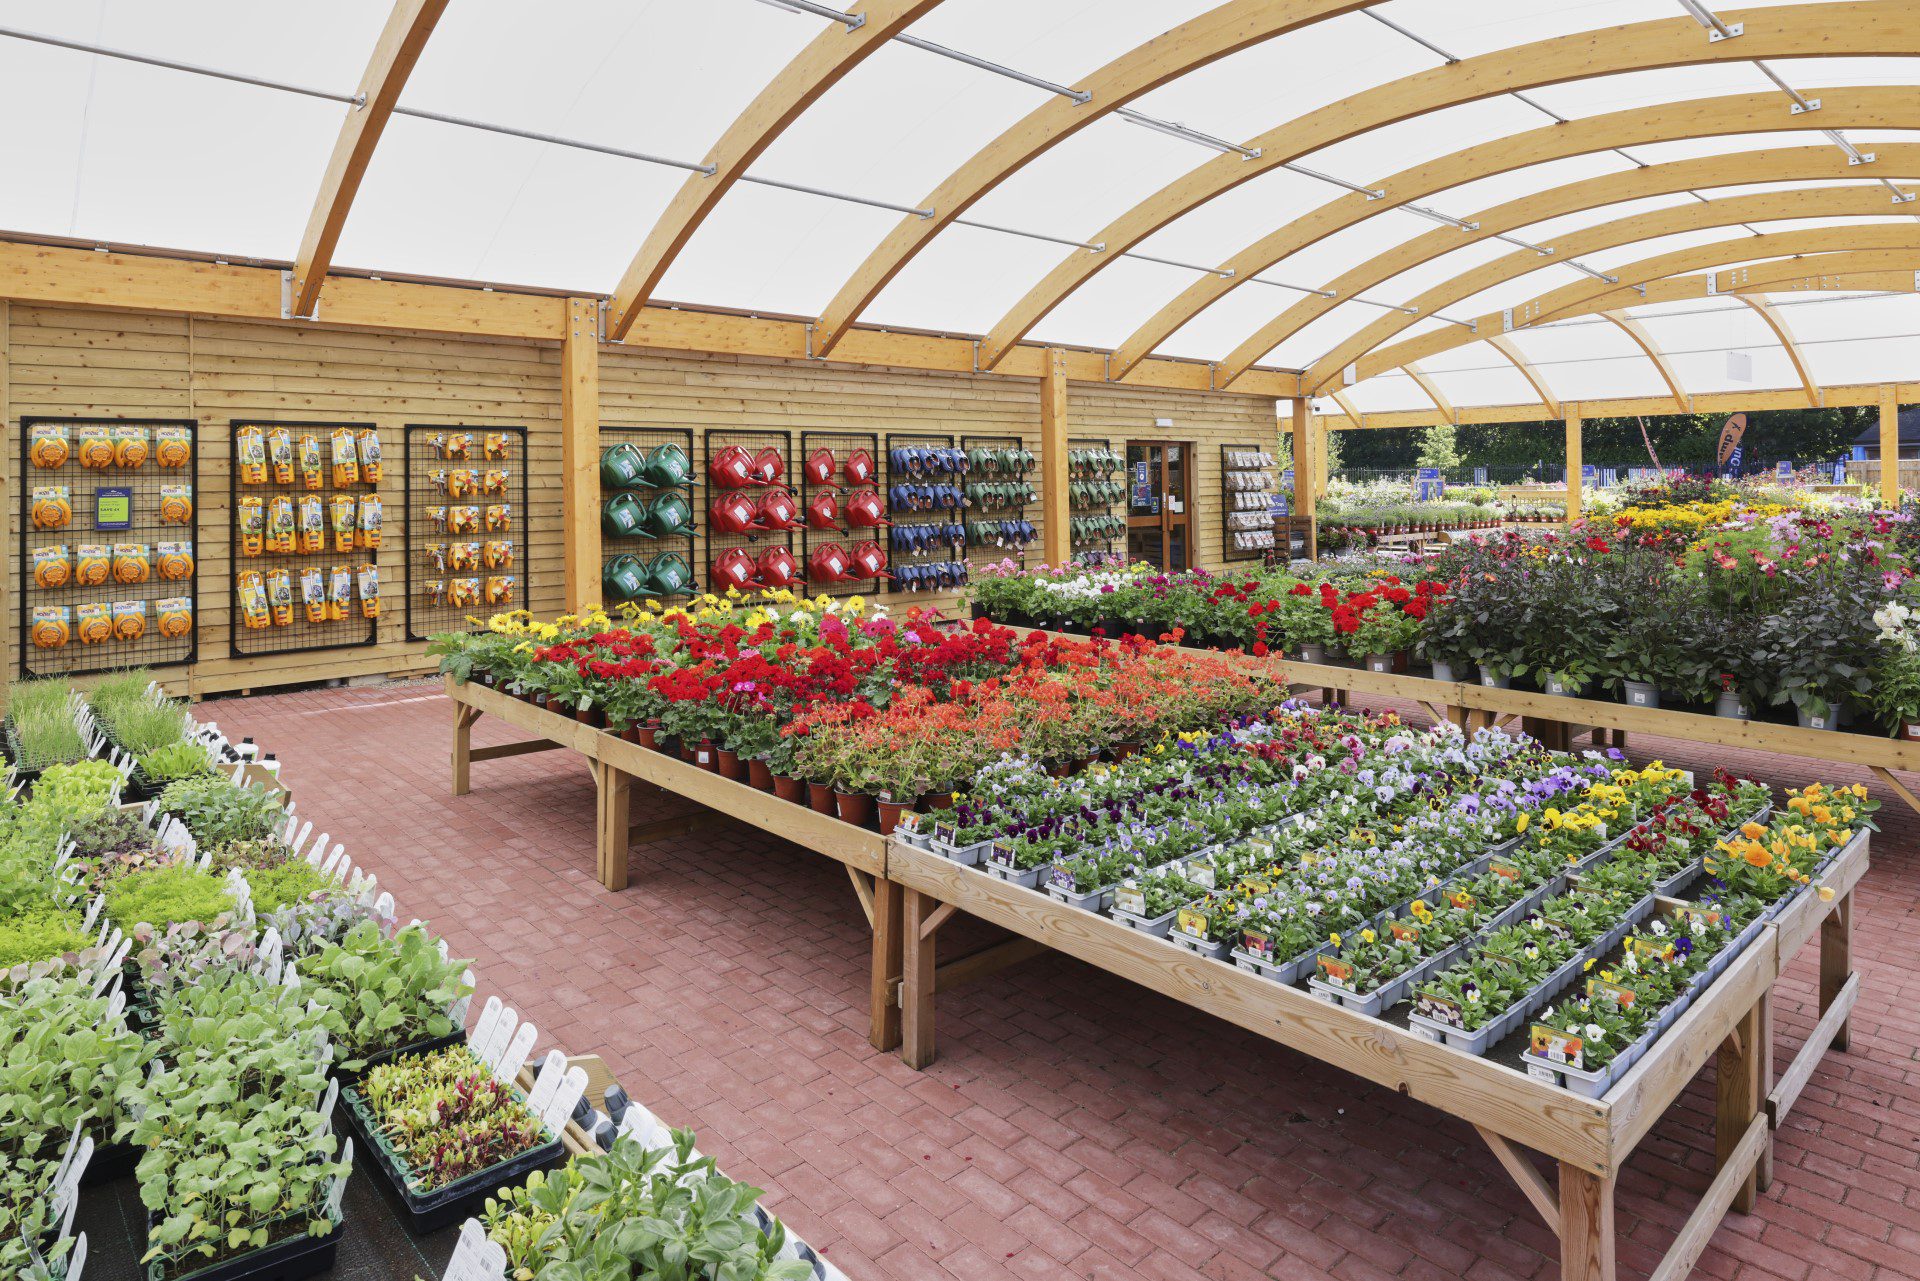 The Bedding Area of a Hillier Garden Centre in Spring Bloom